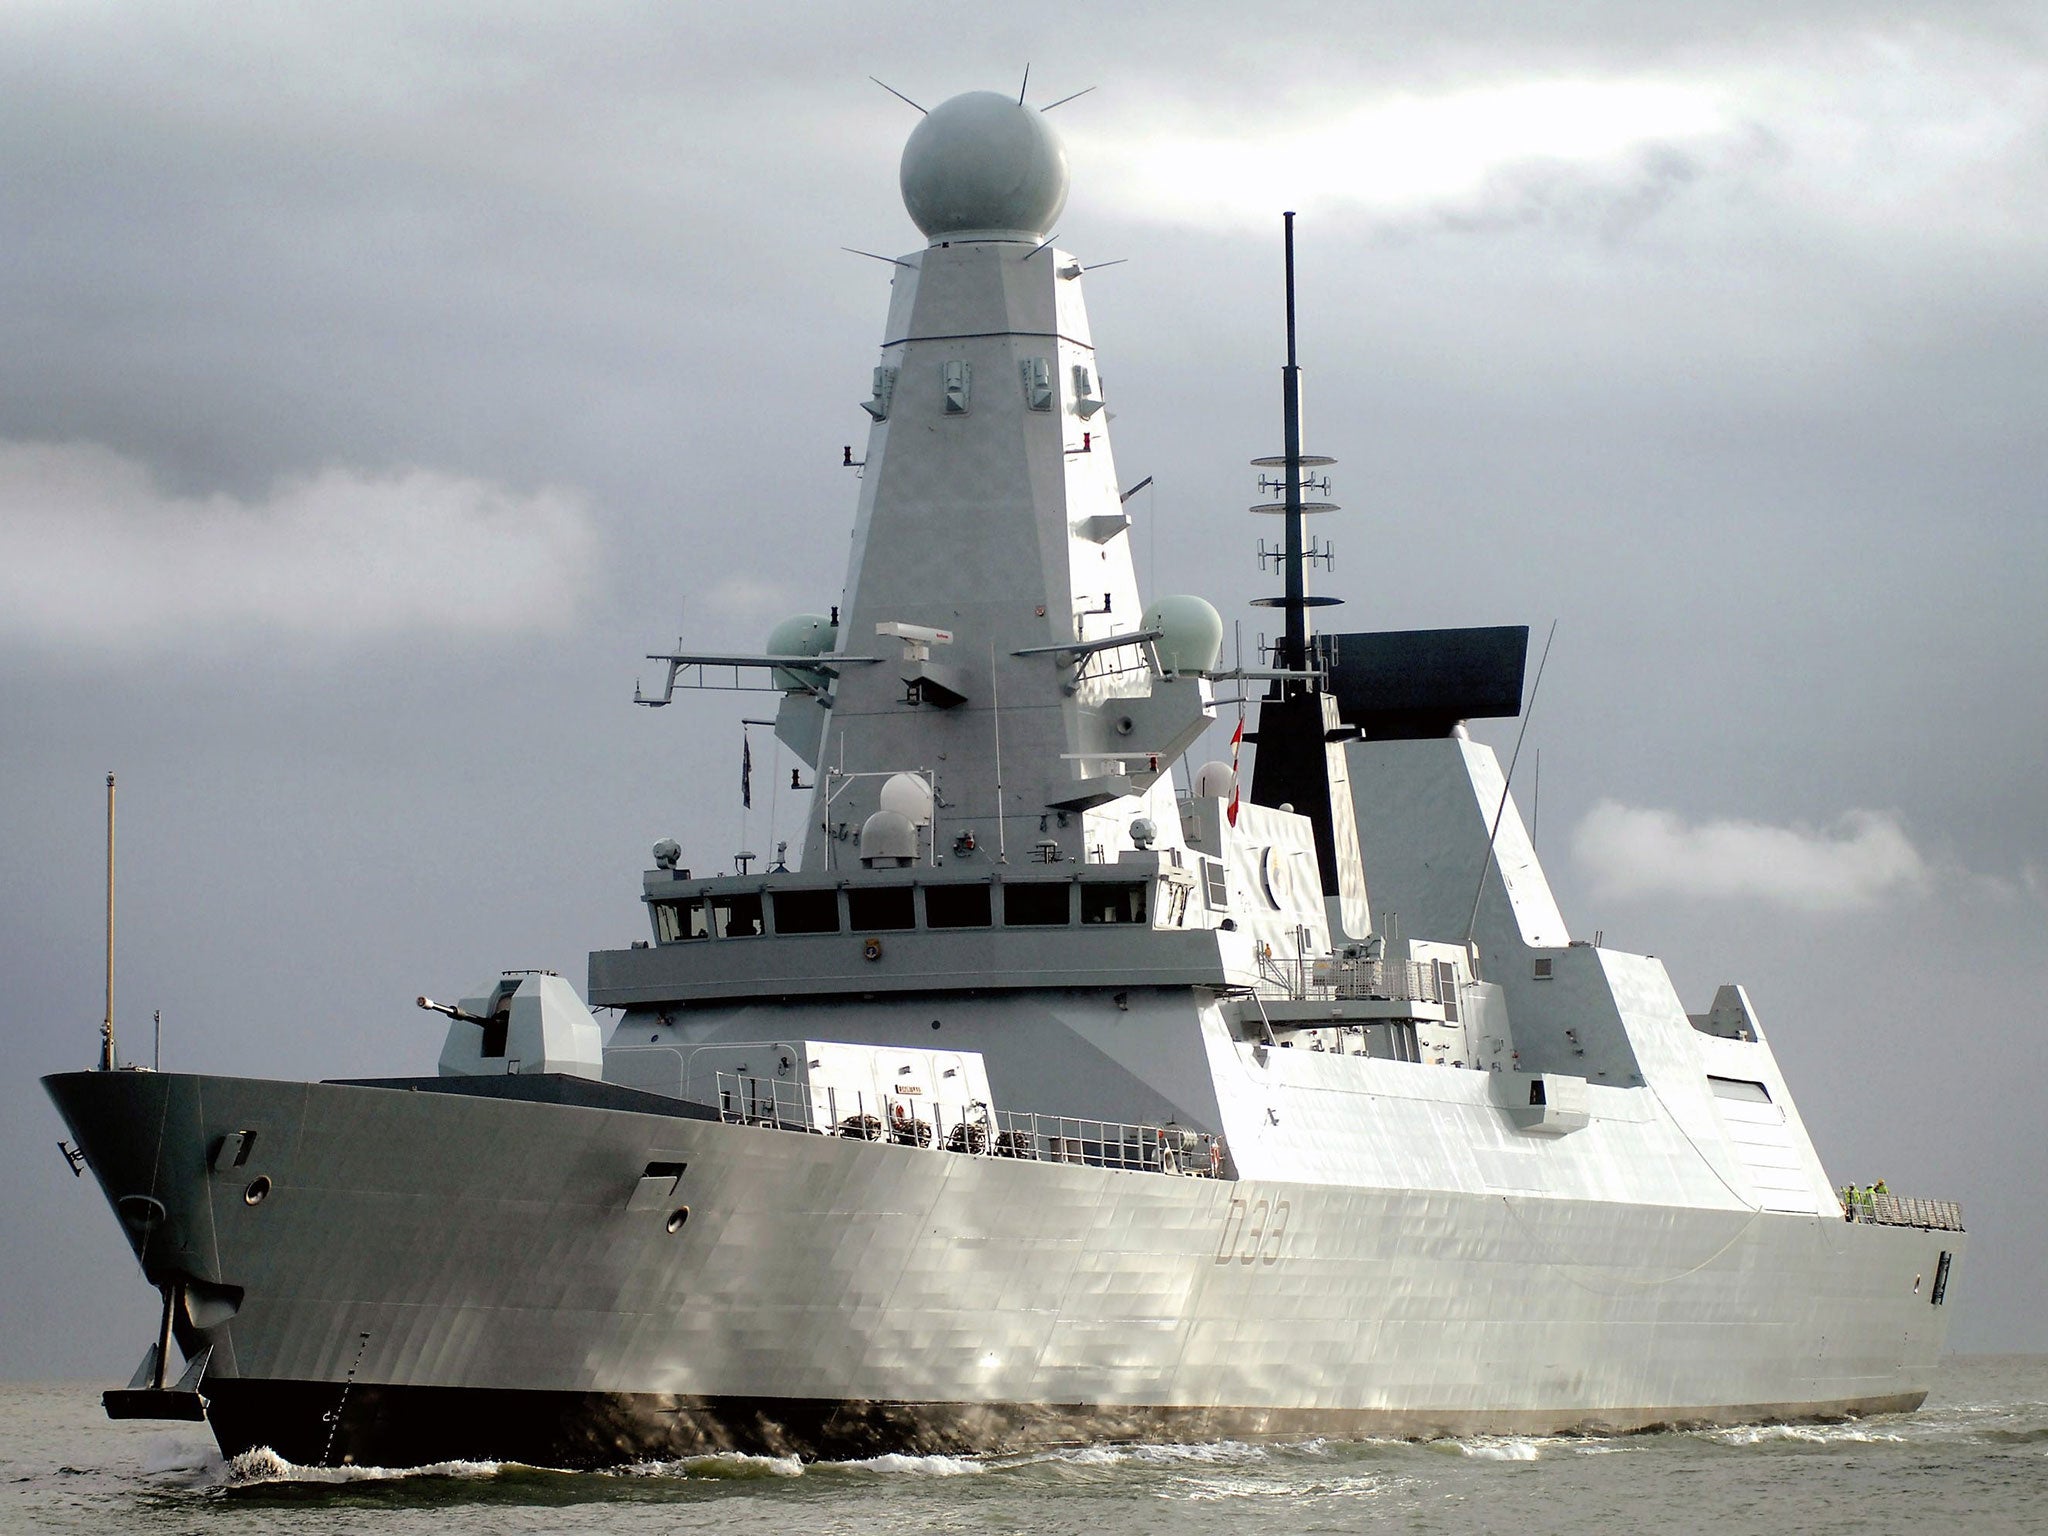 Mina Salman Port will be able to host larger Royal Navy ships such as HMS Dauntless